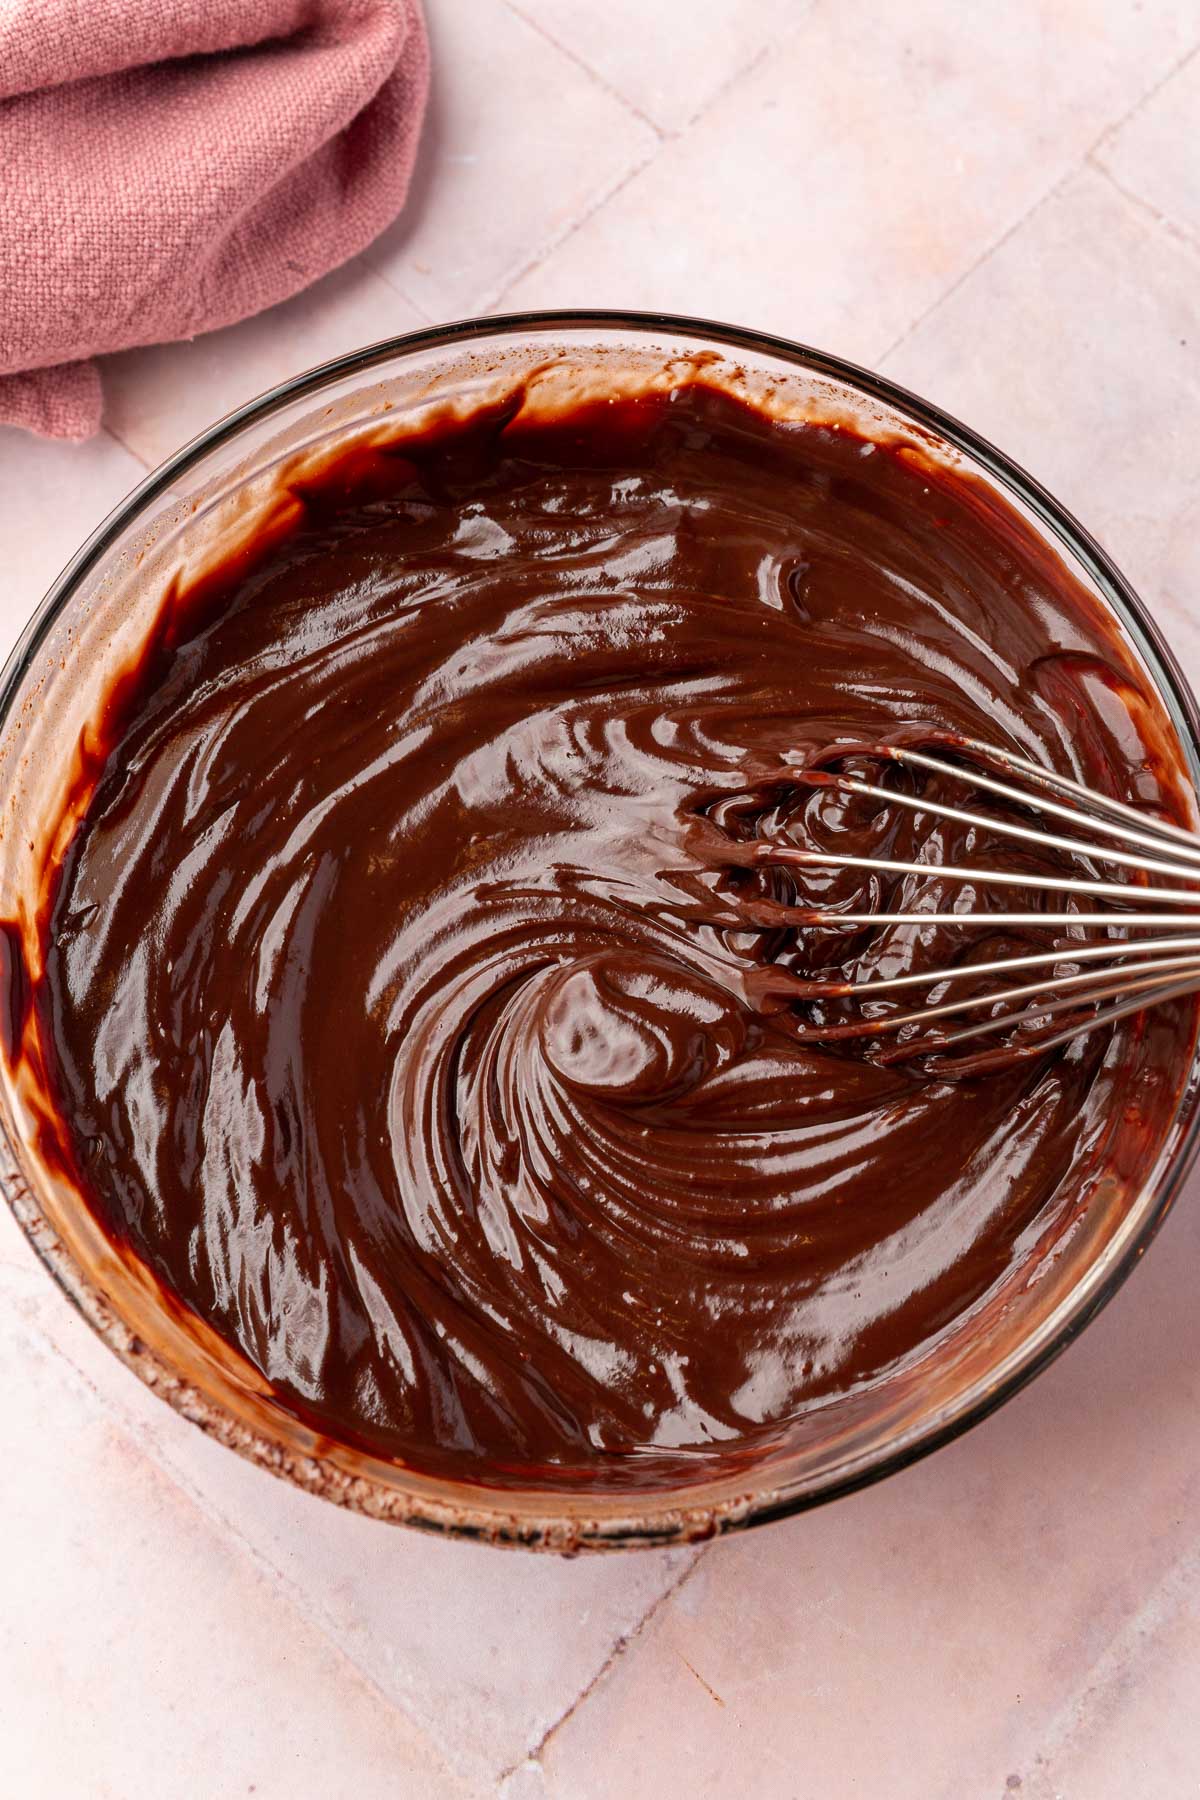 A glass mixing bowl with chocolate ganache and a wire whisk in it.